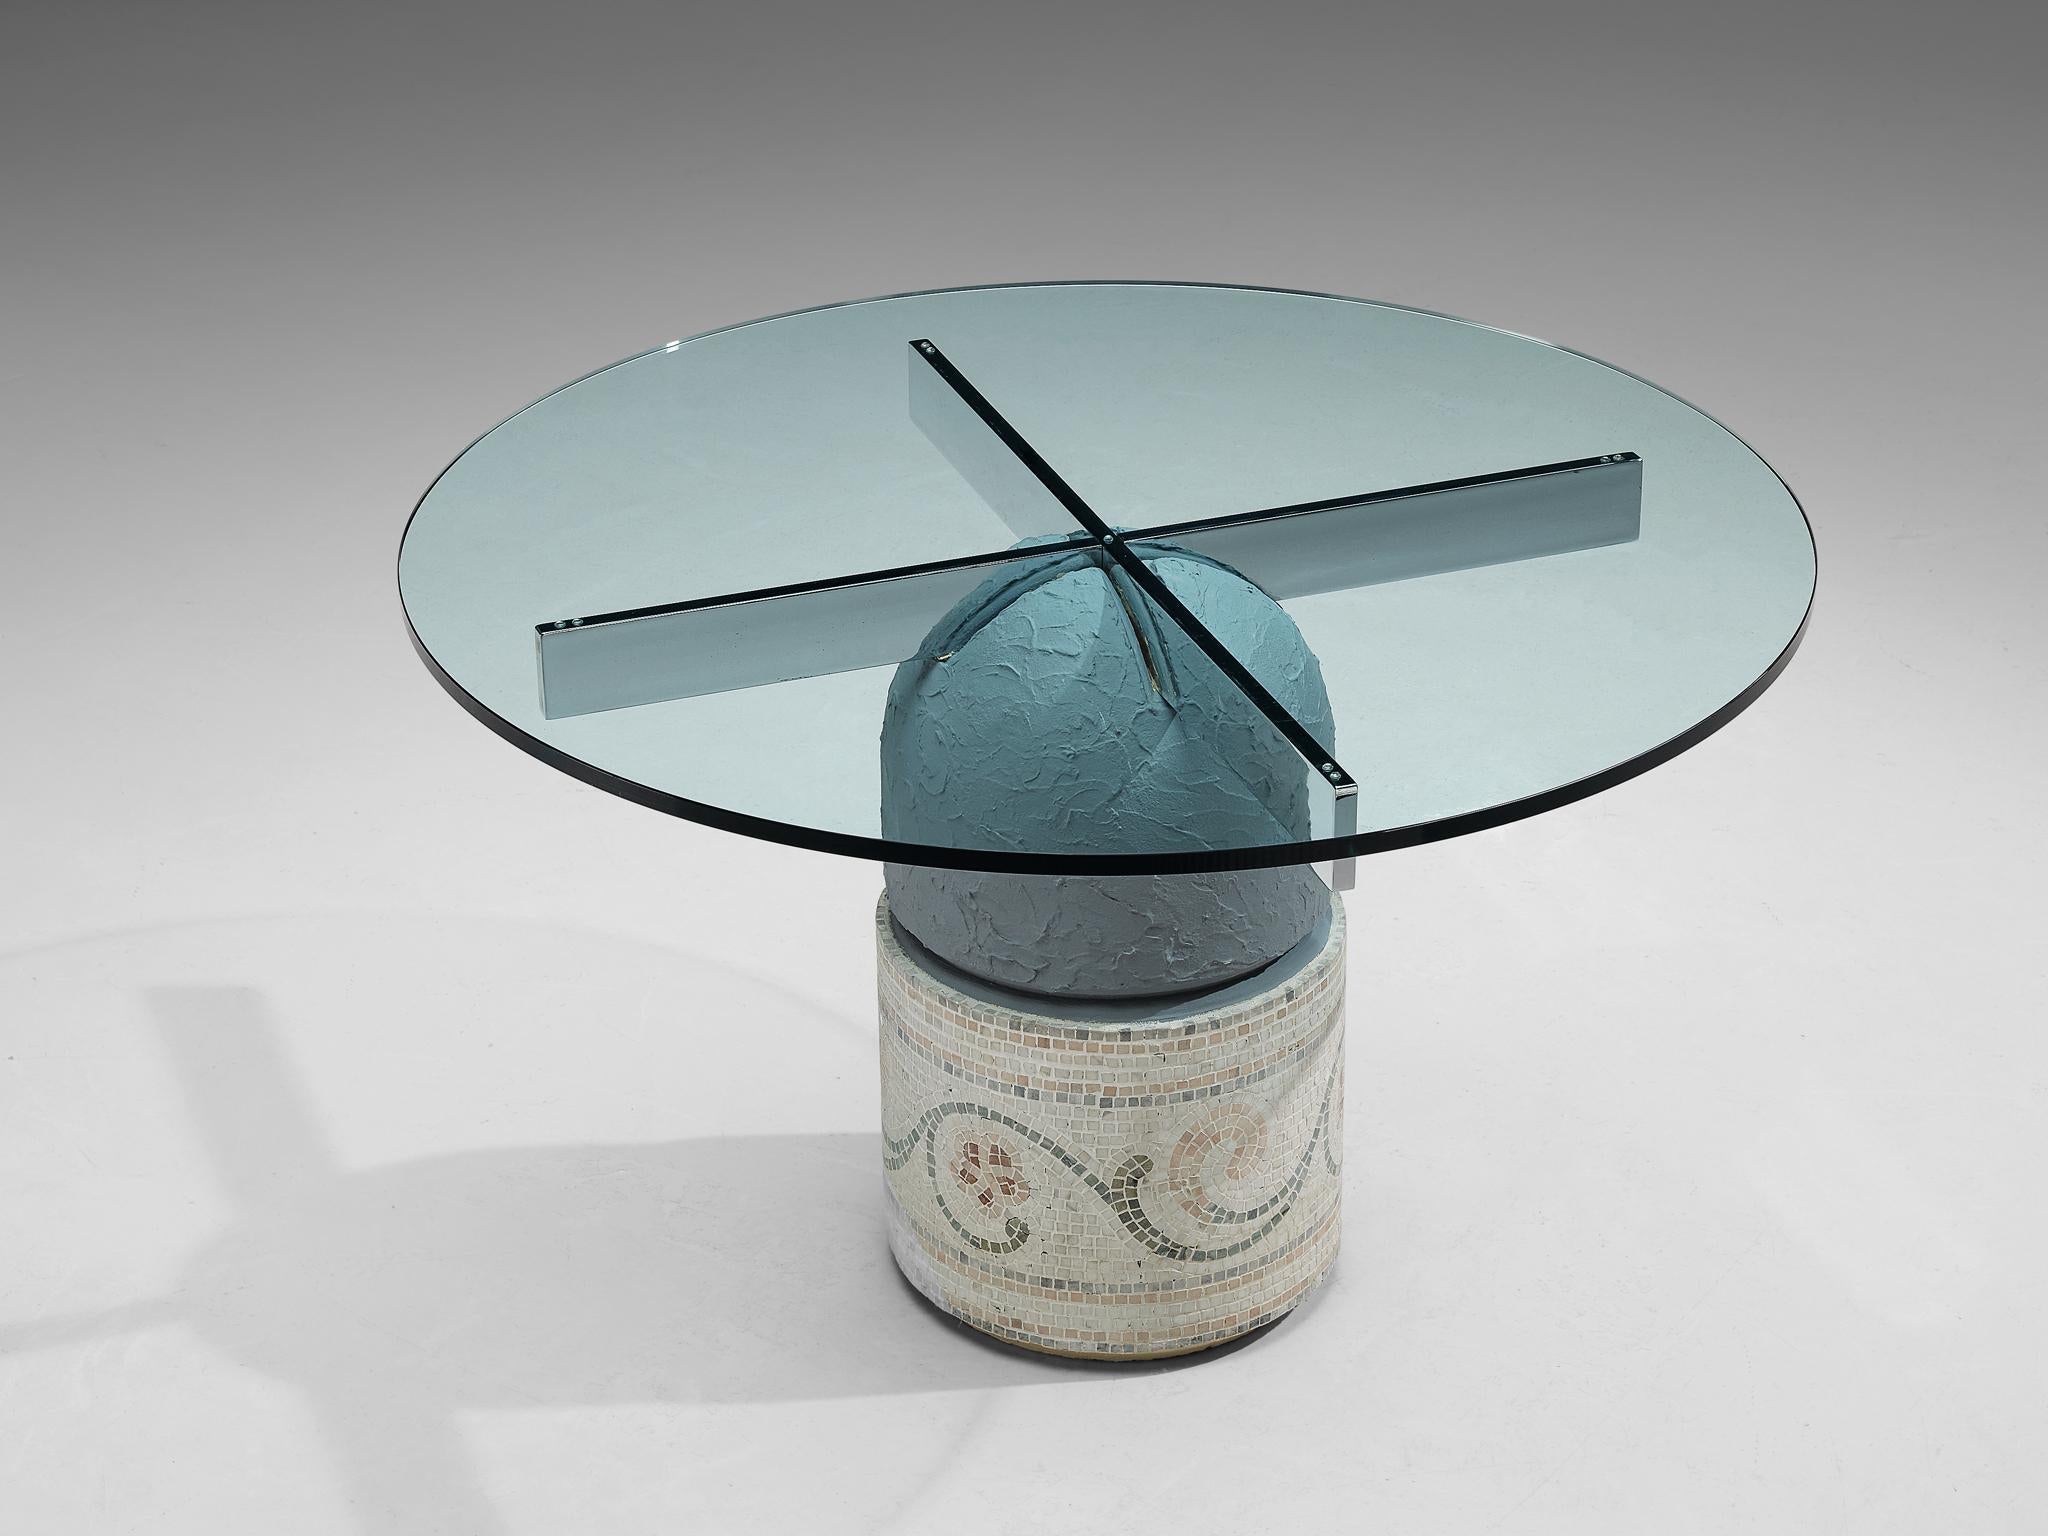 Giovanni Offredi for Saporiti 'Paracarro' Dining Table in Glass and Mosaic